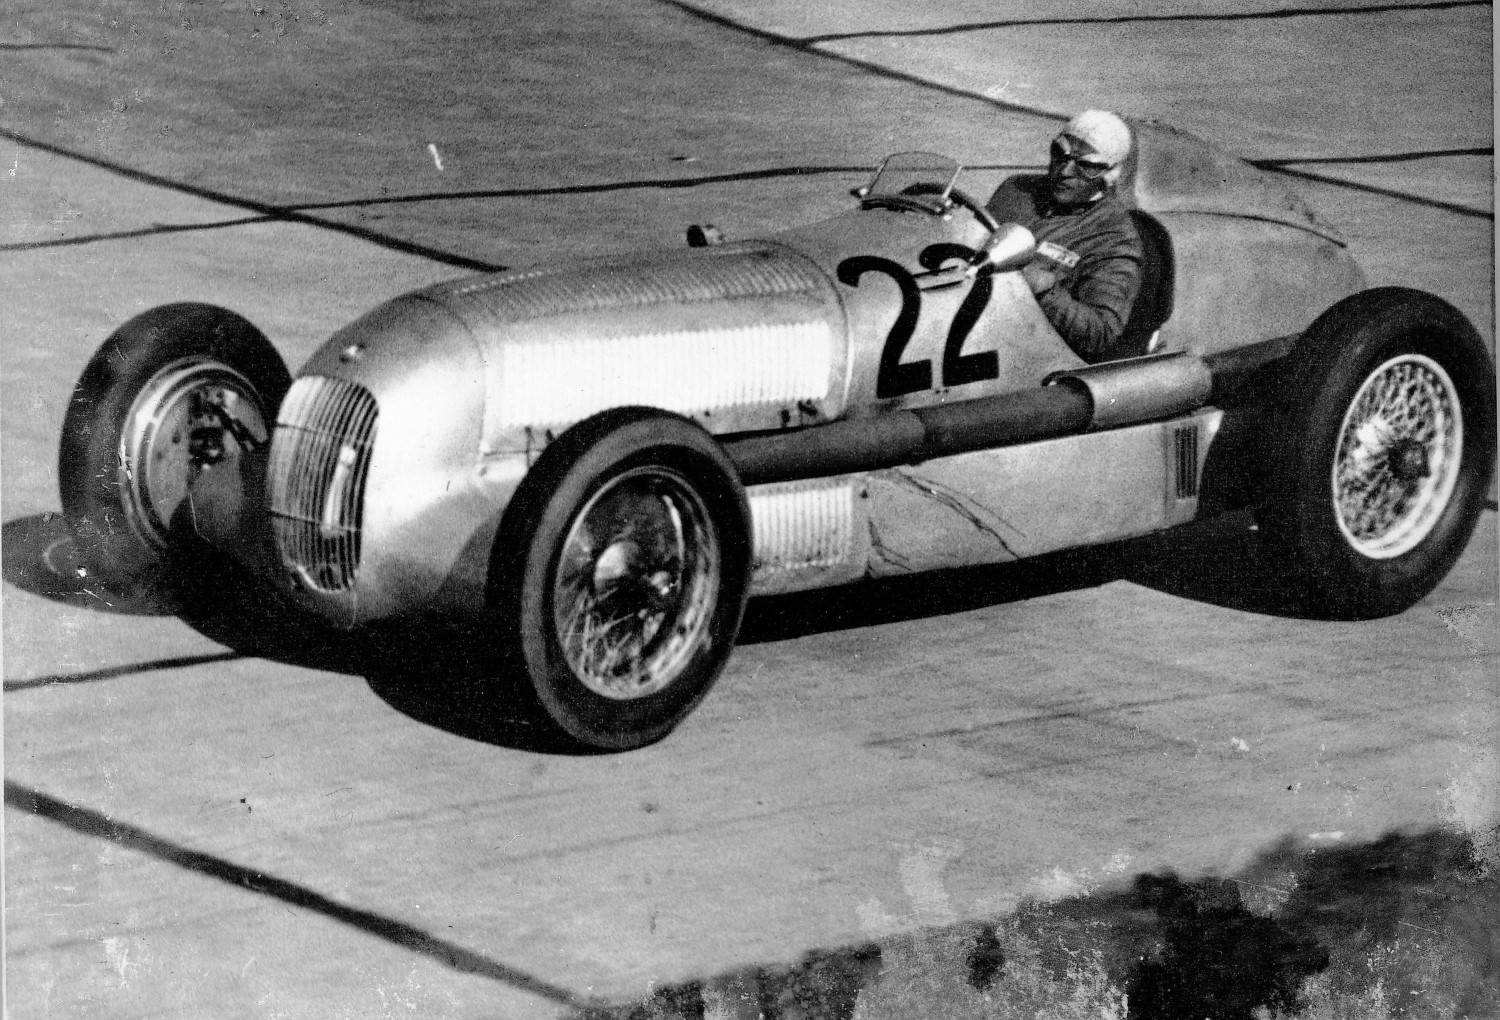 International Eifel race on the NÃ¼rburgring, June 3, 1934. Luigi Fagioli (start number 22) in a Mercedes-Benz 750-kg formula racing car W 25. The 1934 Eifelrennen was the first race the Mercedes-Benz W 25 ever competed in. Manfrd von Brauchitsch won the race in the new W 25.